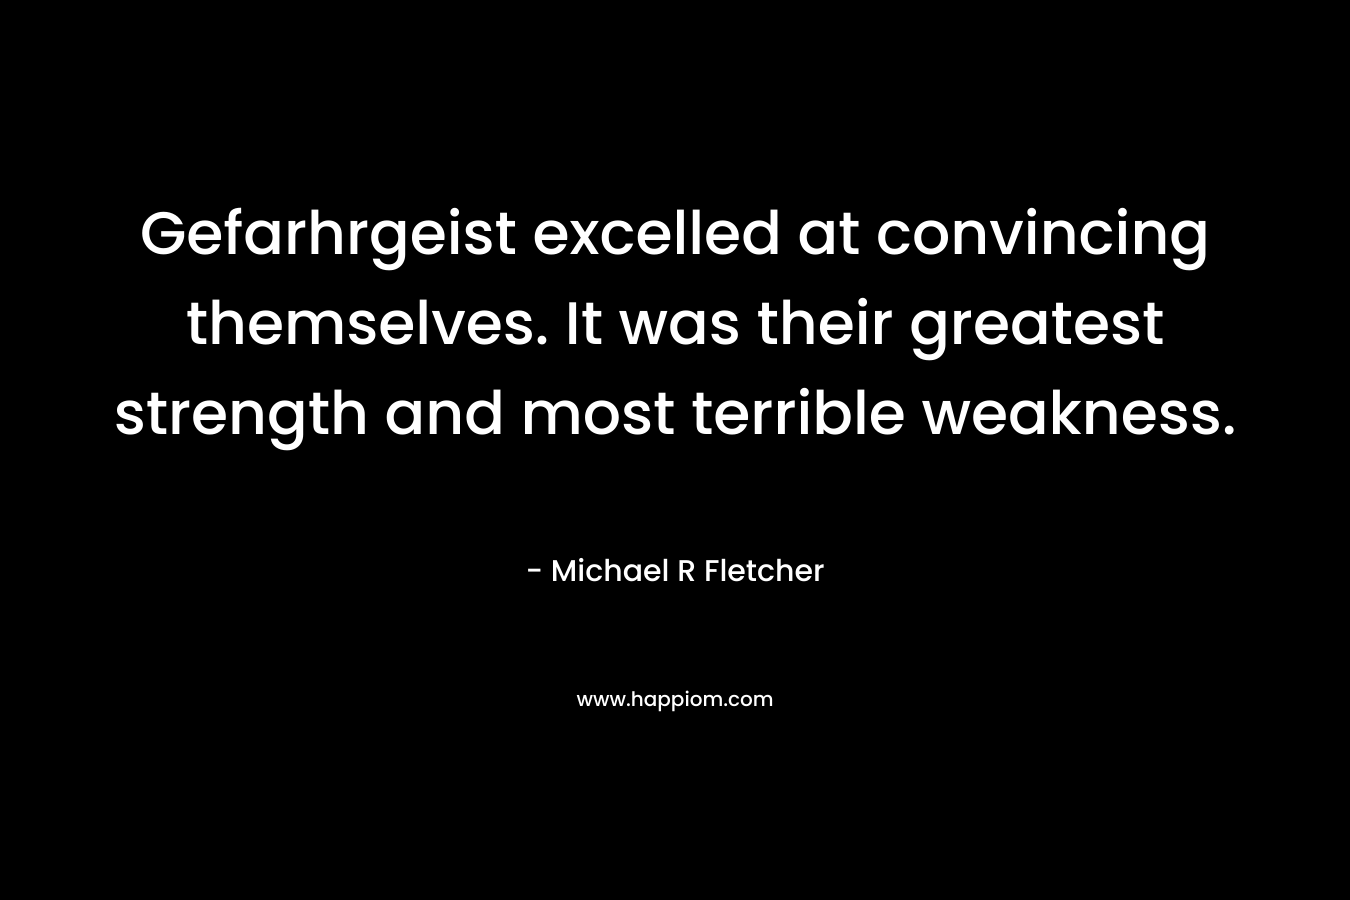 Gefarhrgeist excelled at convincing themselves. It was their greatest strength and most terrible weakness.